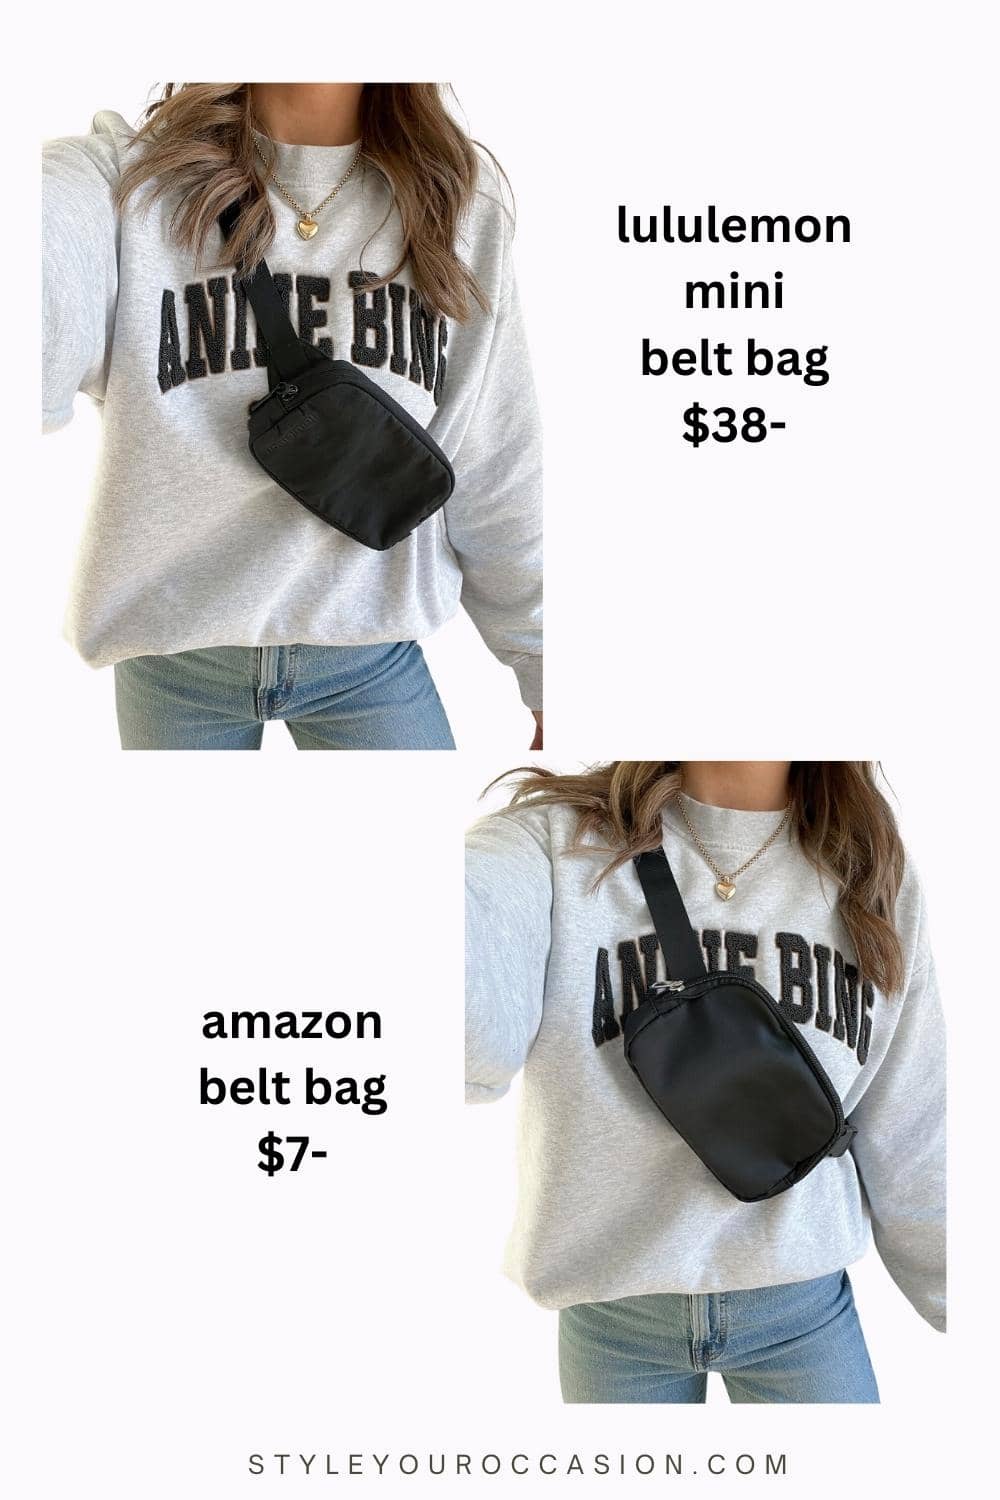 image comparing a woman wearing two black belt bags, one from lululemon, and one a dupe from amazon